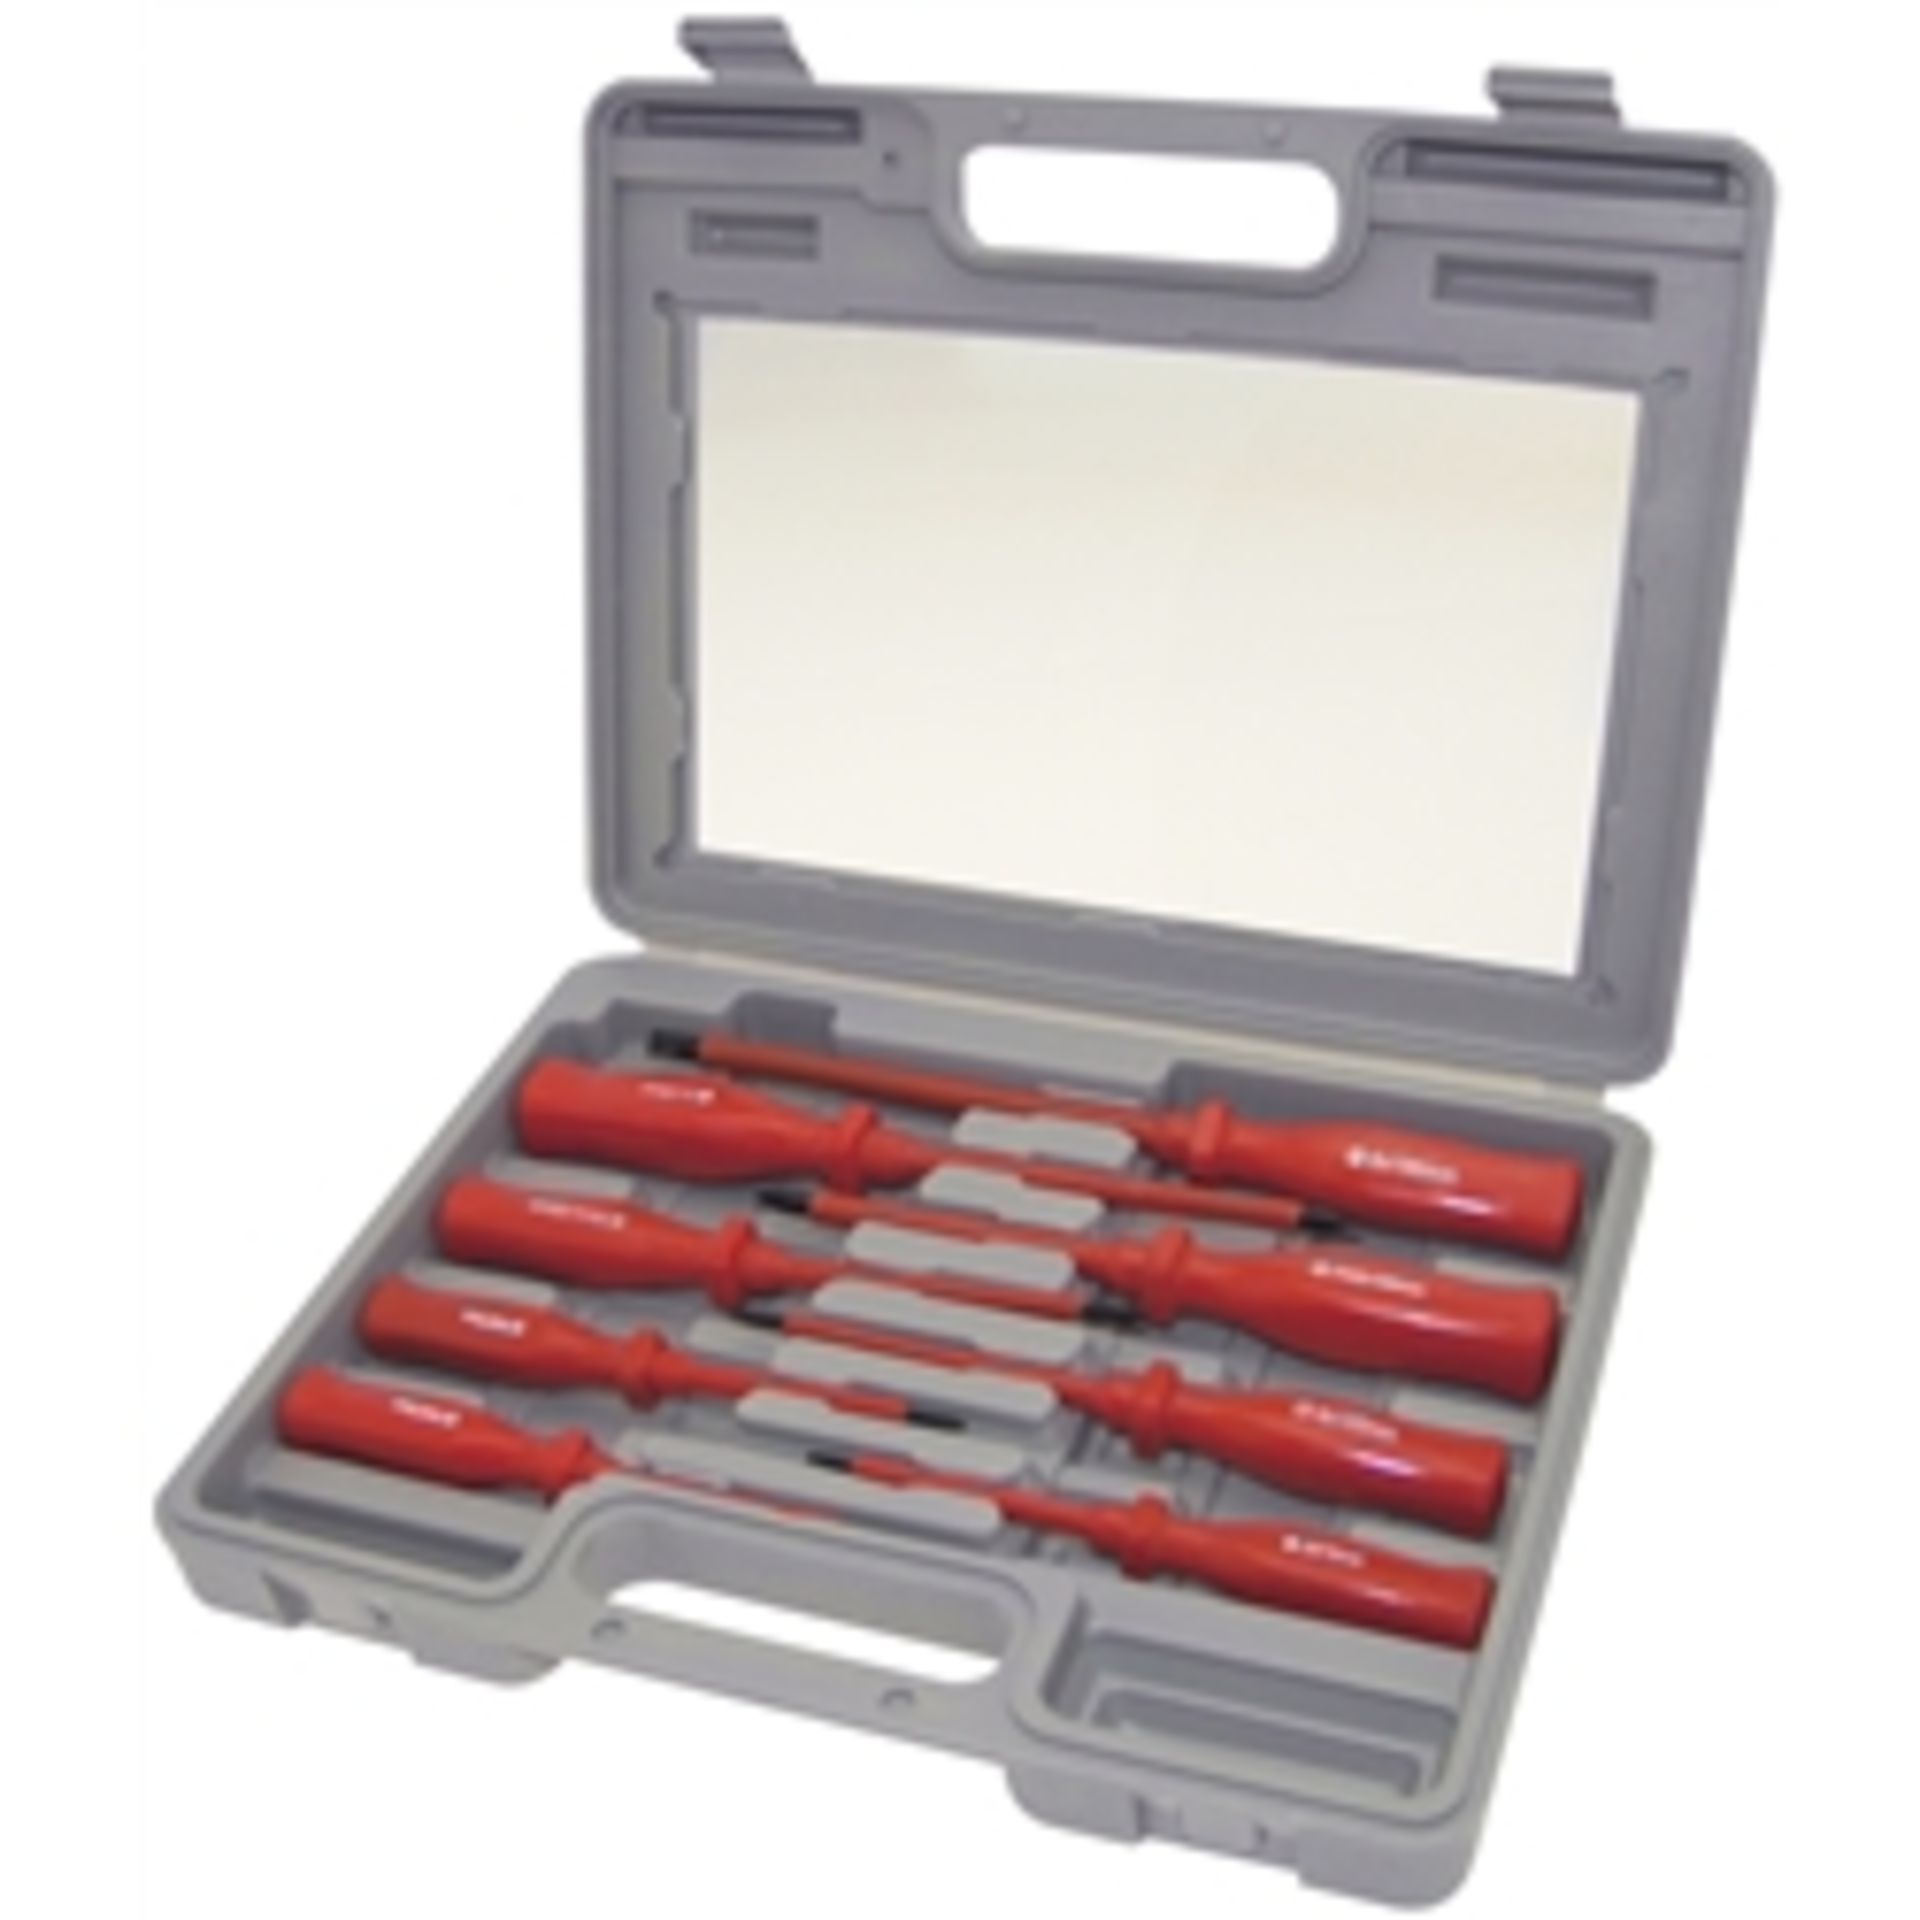 V *TRADE QTY* Brand New Eight Piece Screwdriver Set In Carry case X 4 YOUR BID PRICE TO BE - Image 2 of 2